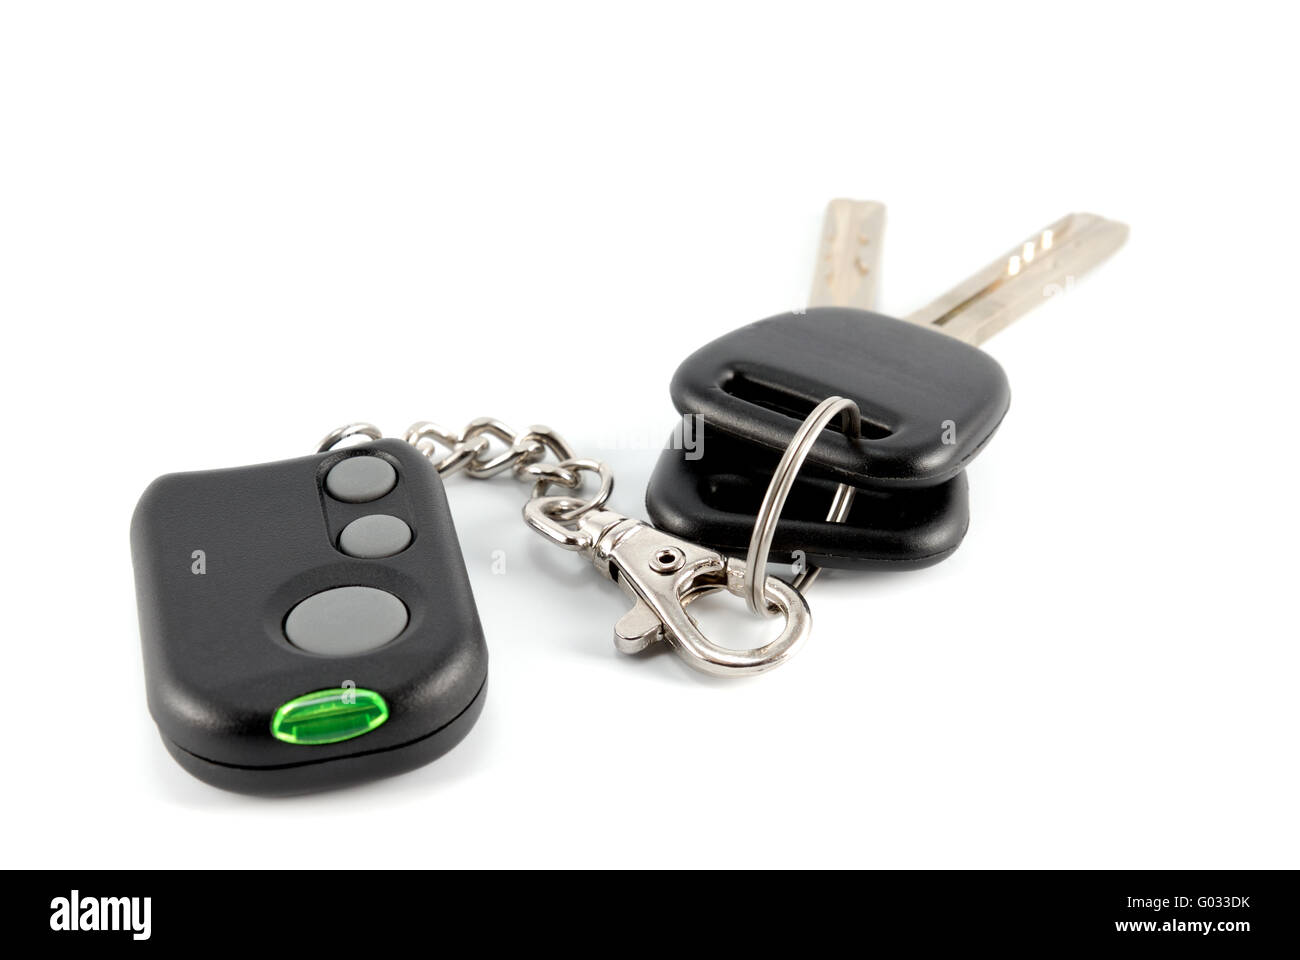 Automobile keys and charm from the autosignal system Stock Photo